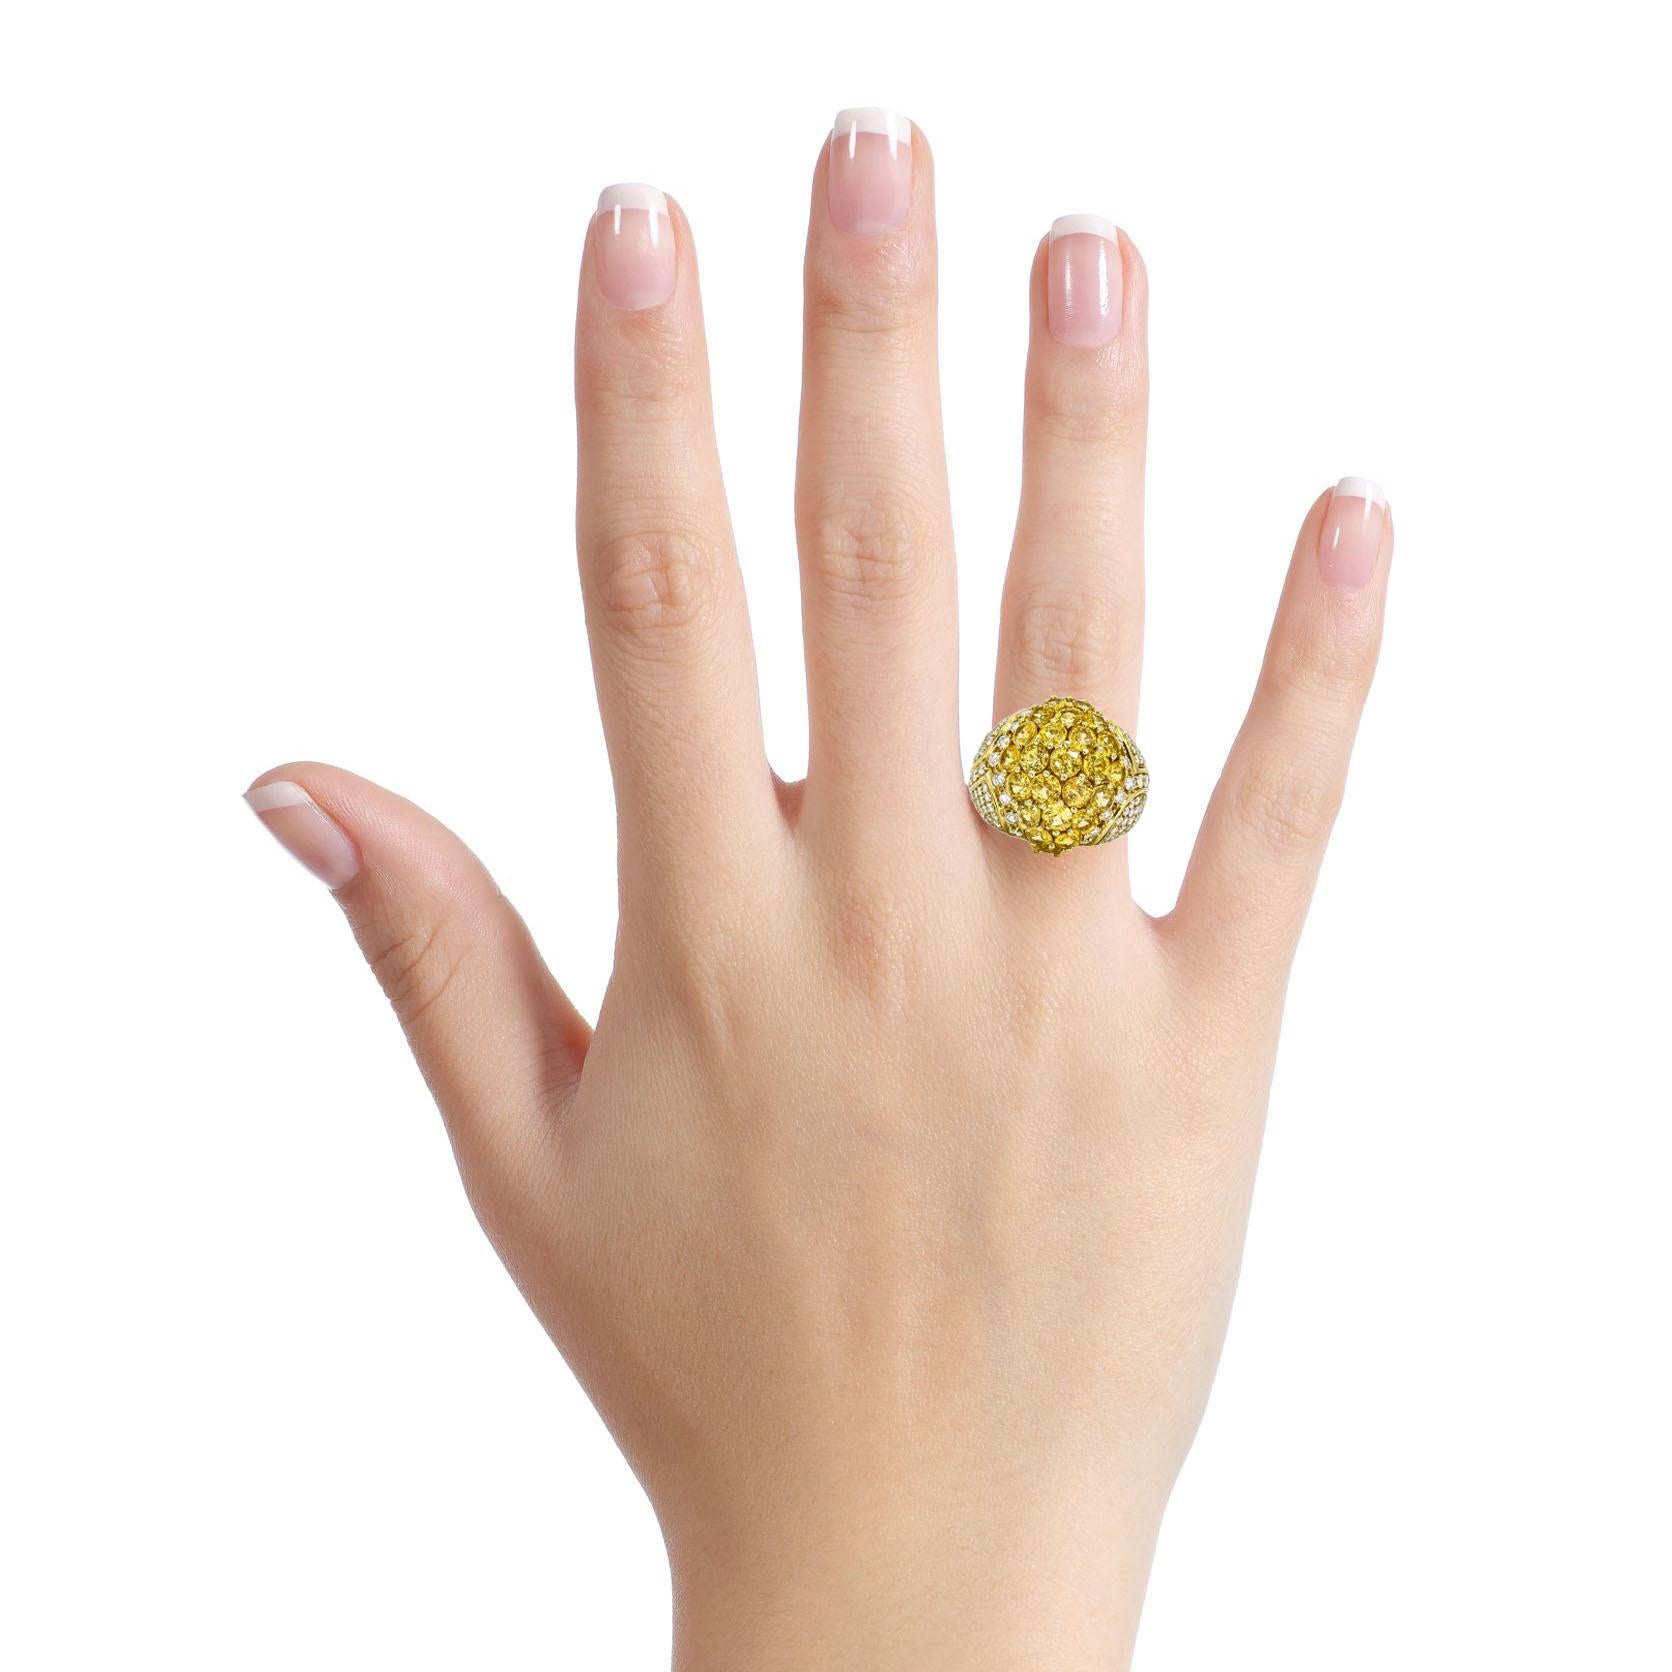 Diamond and vibrant yellow sapphires bombe ring crafted in 18-karat yellow gold. Polished metal dome ring setting with 5 carats of round-cut natural yellow sapphires, and pave diamonds on the sides. Made in Italy. Signed, Italian Marker's Mark 2802